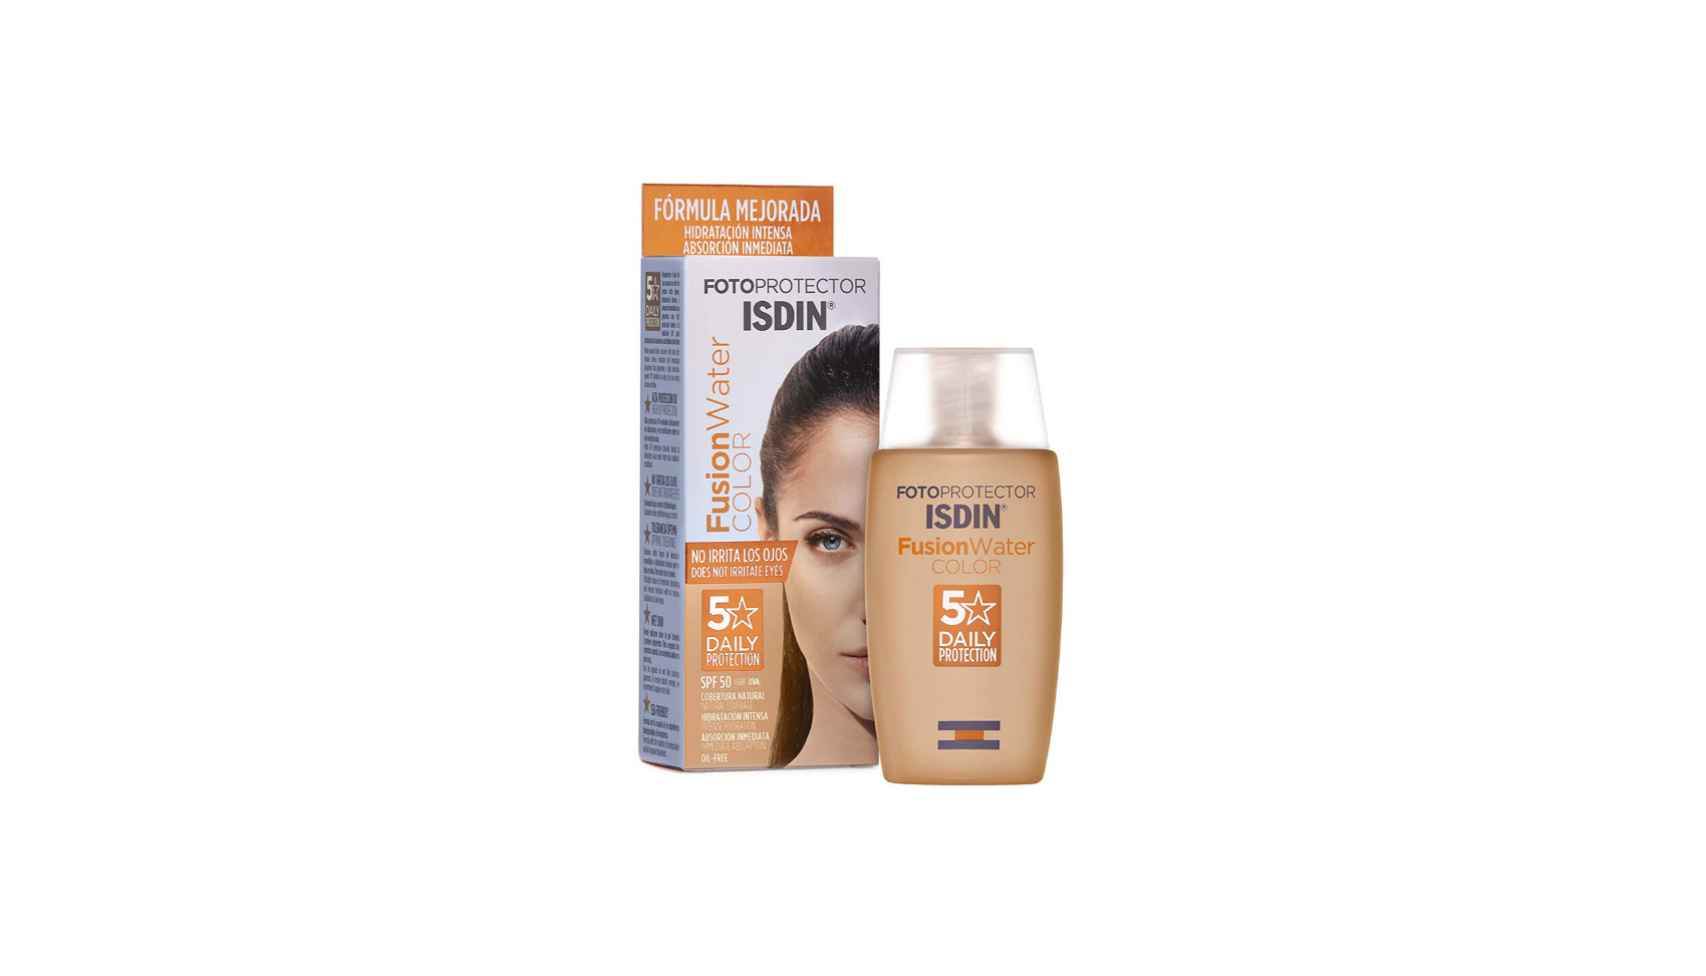 Isdin Fotoprotector Fusion Water COLOR SPF 50